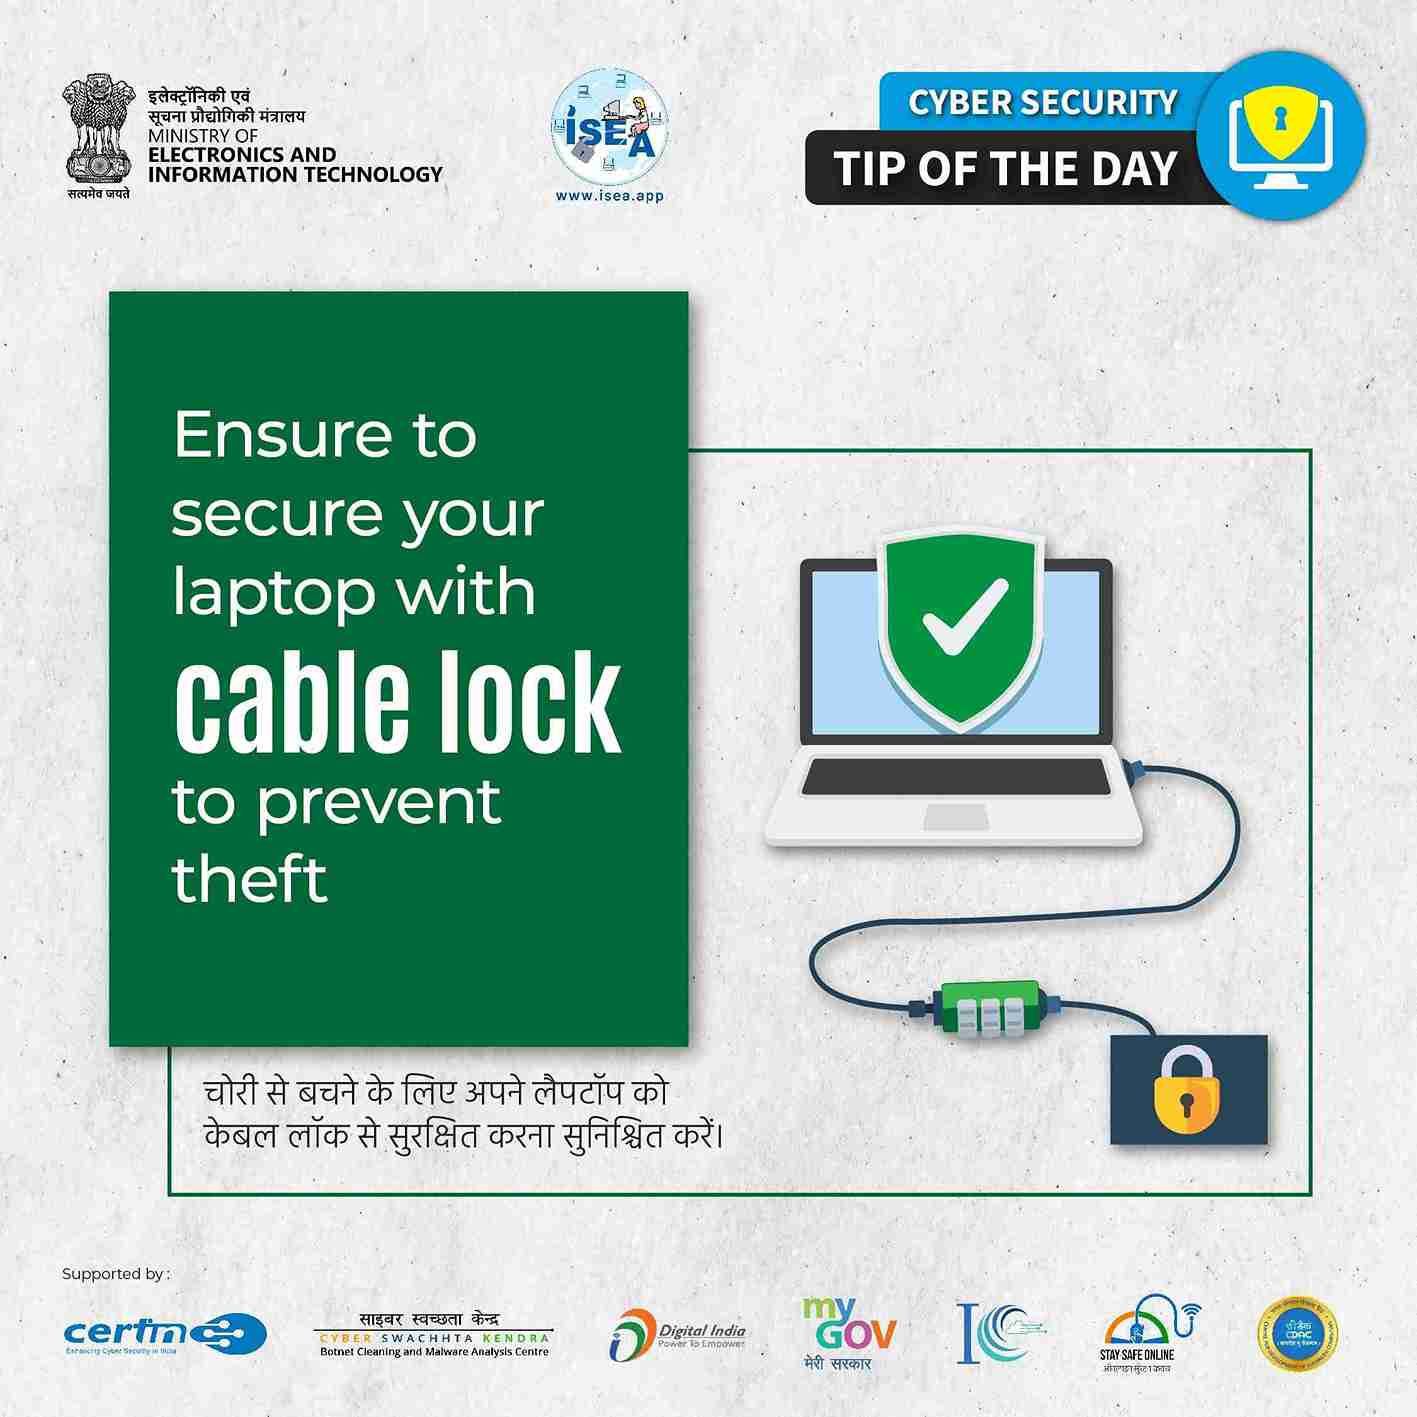 Cyber Security Tip of the Day 13